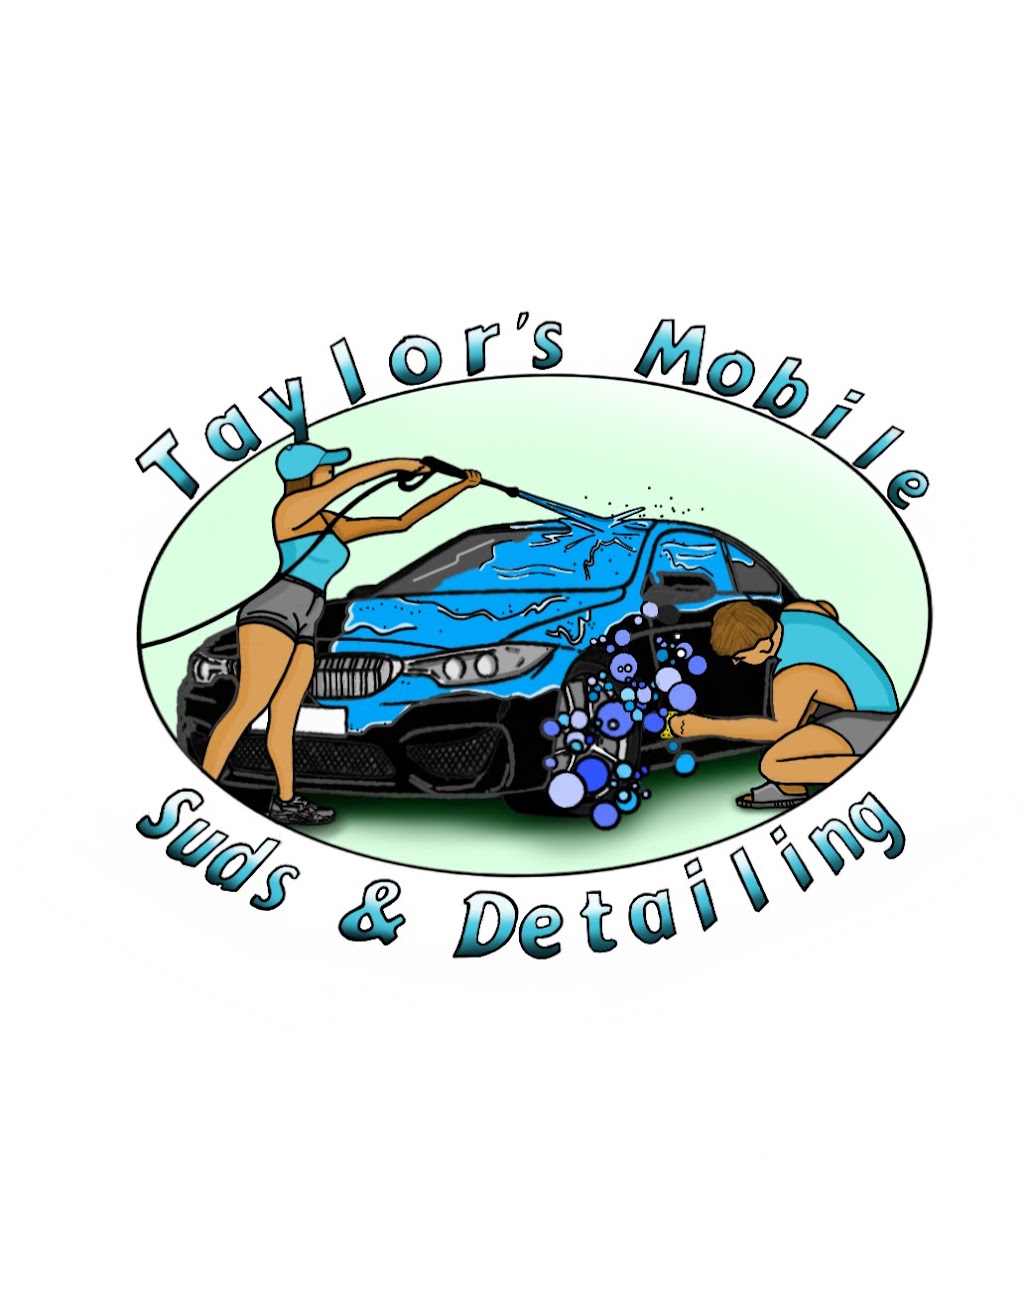 Taylors Mobile Suds & Detailing | 14695 Briar Forest Dr, Houston, TX 77077 | Phone: (346) 405-9105